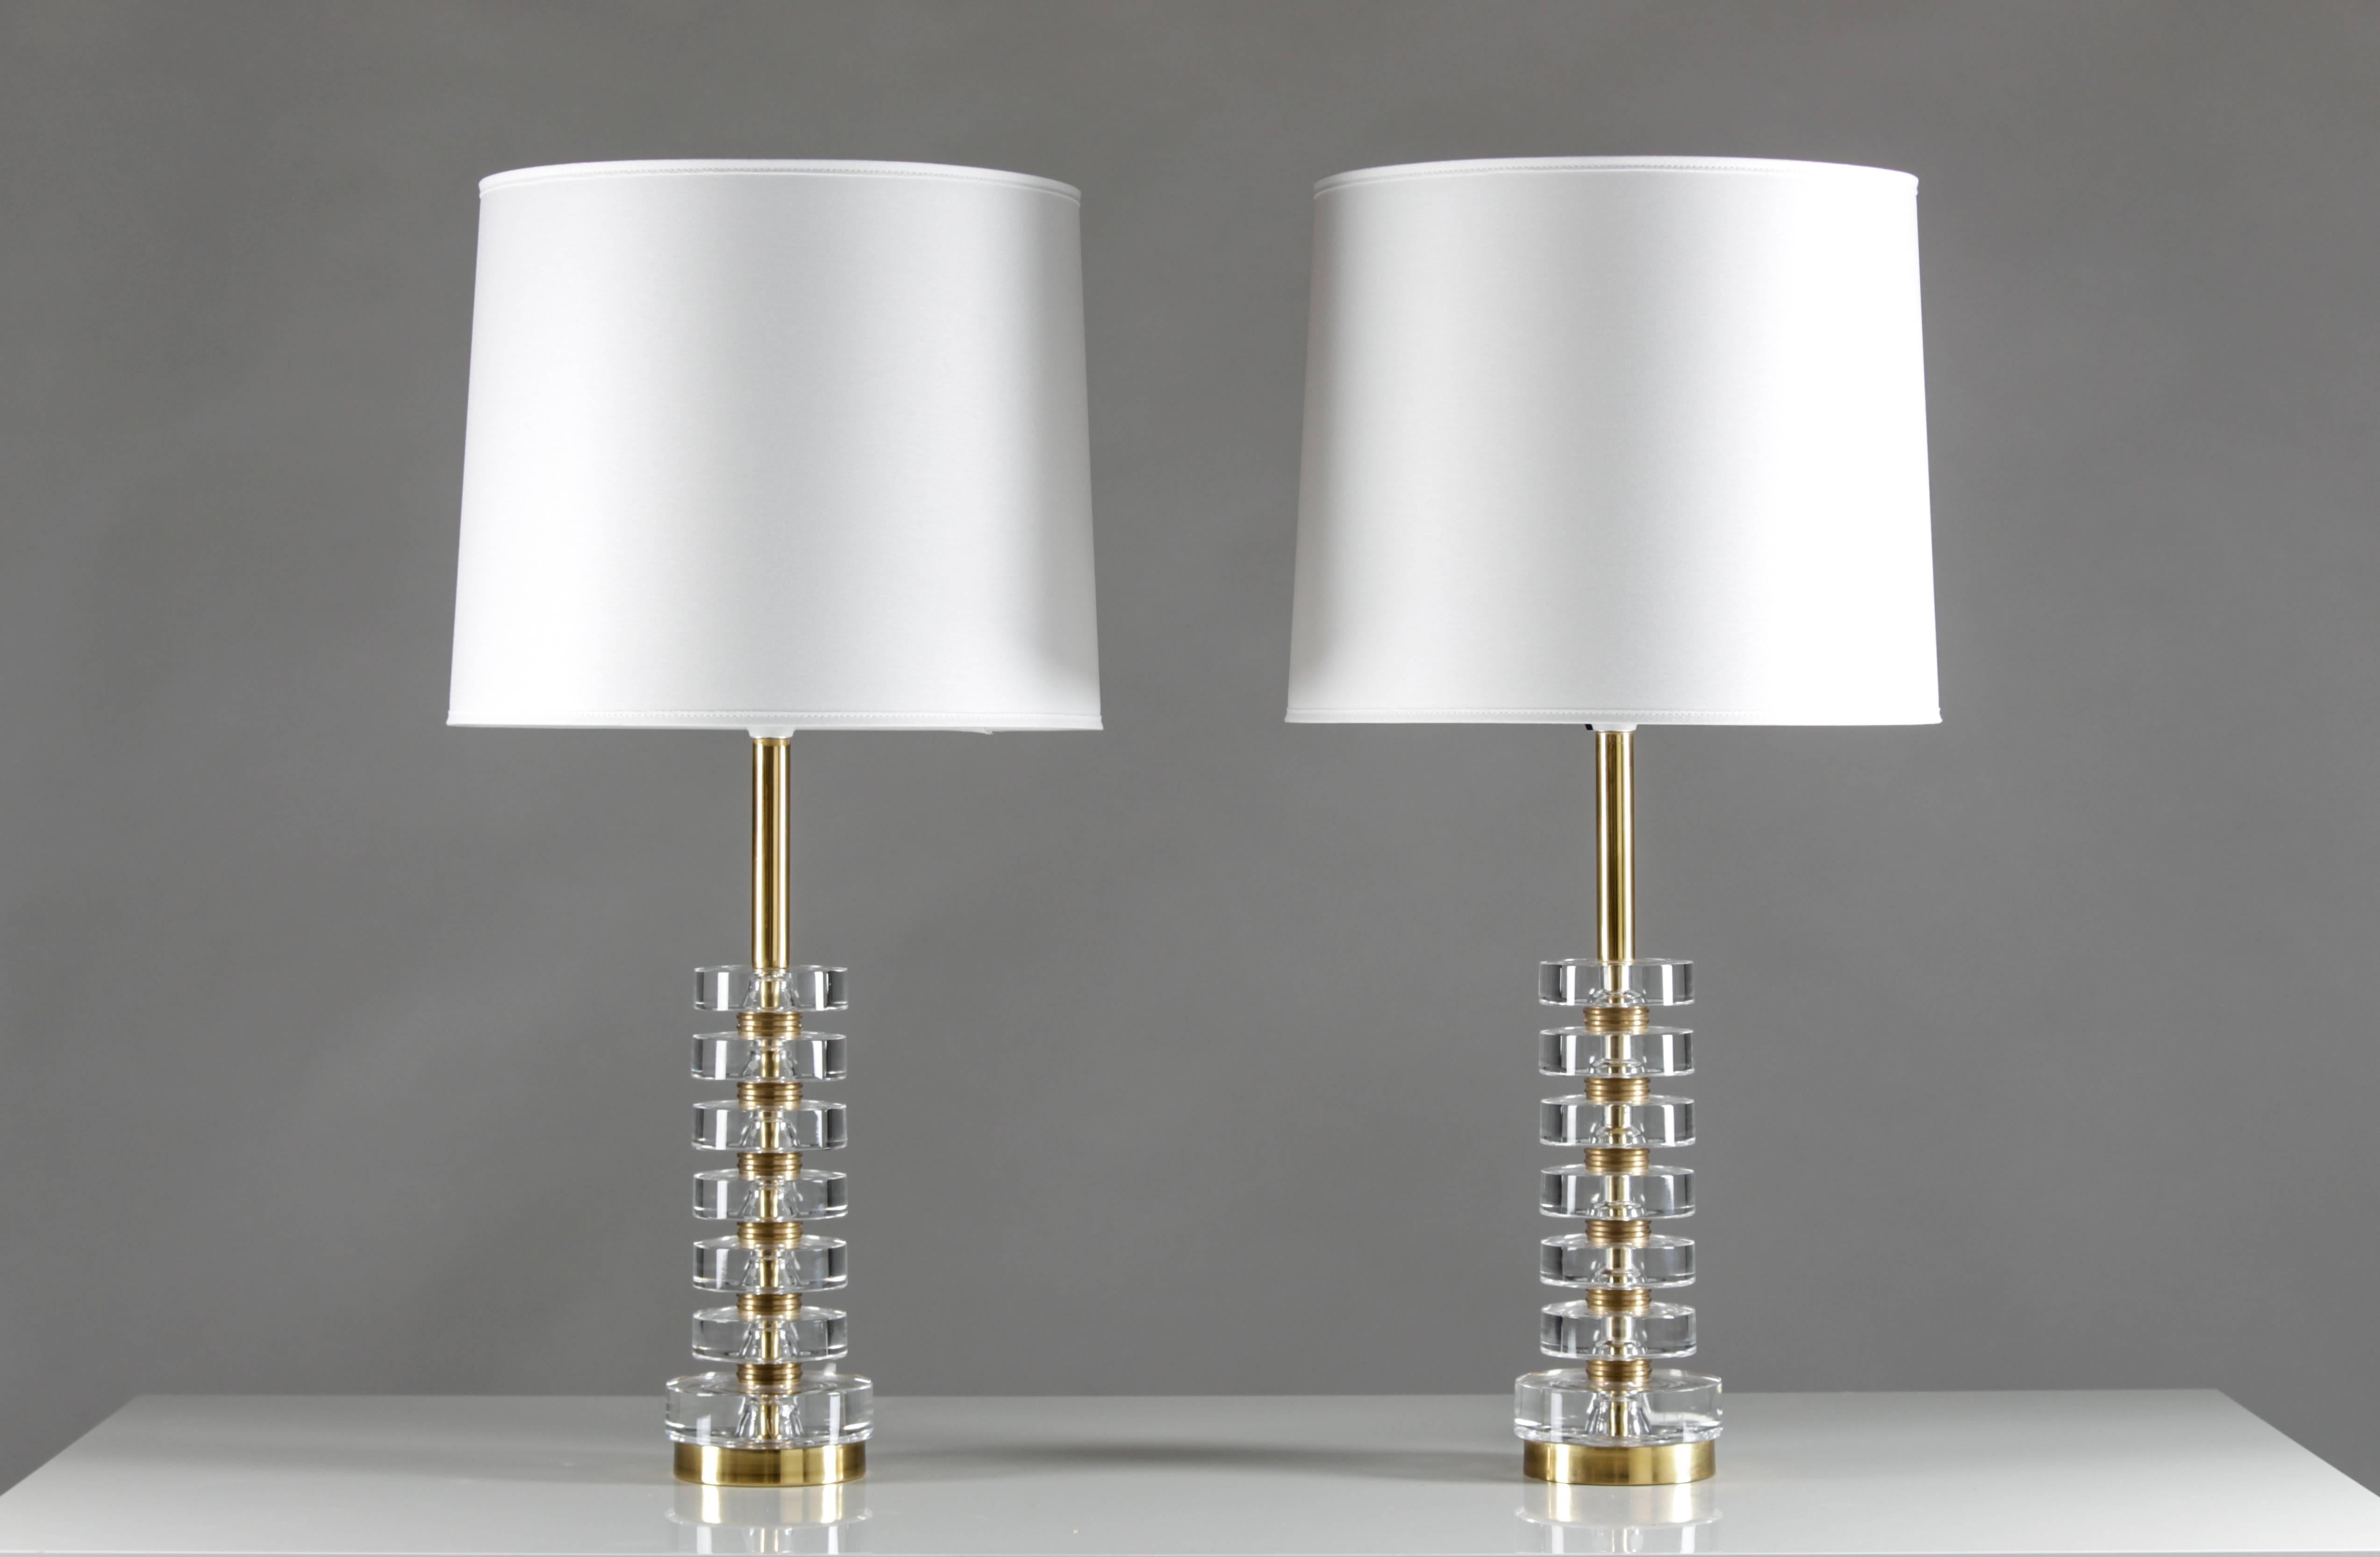 Four magnificent table lamps by Carl Fagerlund for Orrefors, Sweden.
The lamps consist of six discs made of clear crystal glass, separated by solid brass discs. 
Condition: The lamps are in very good original condition. The brass tube on top has